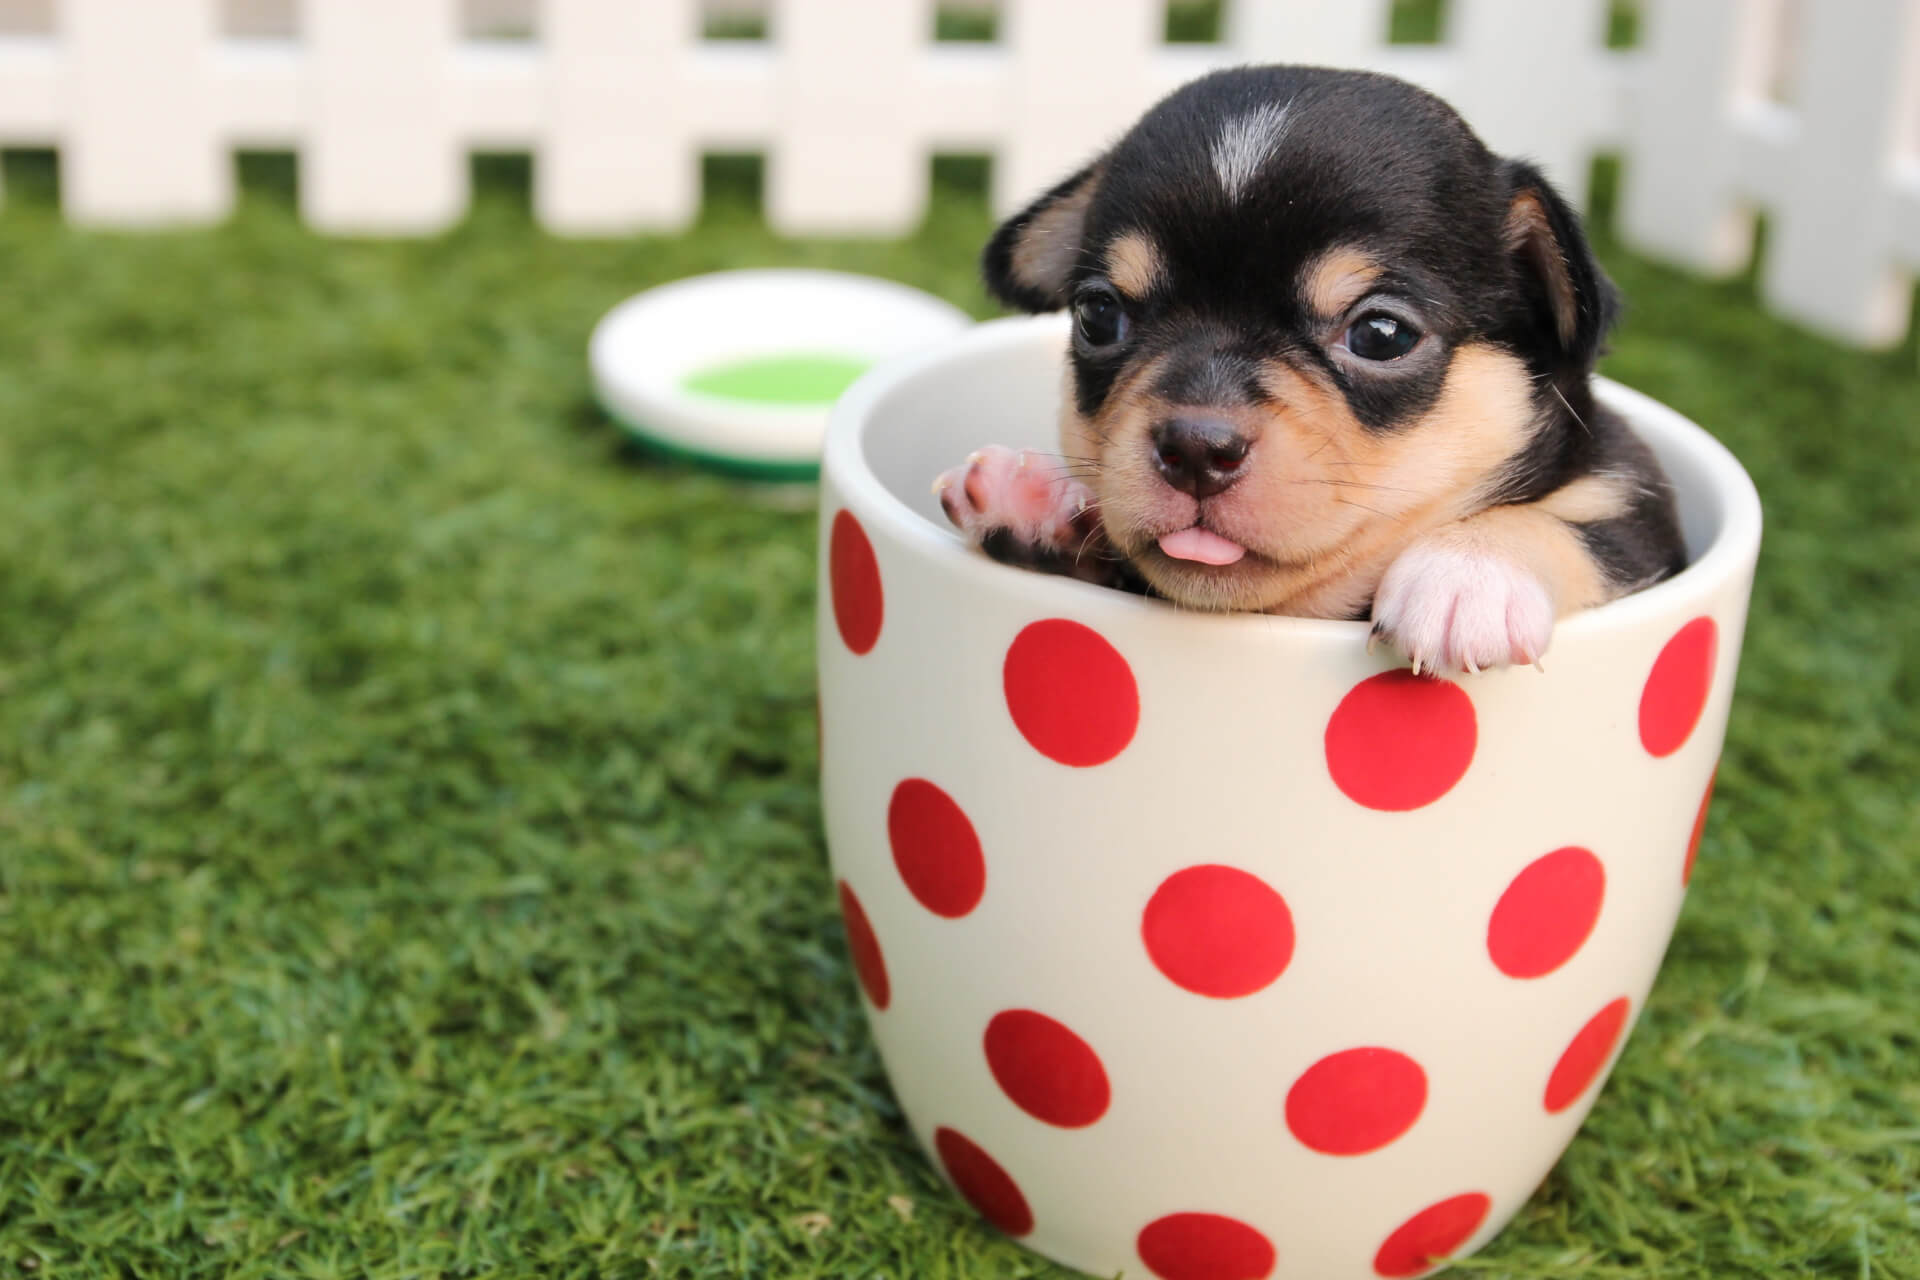 Teacup Chihuahua - Facts, Pros and Cons